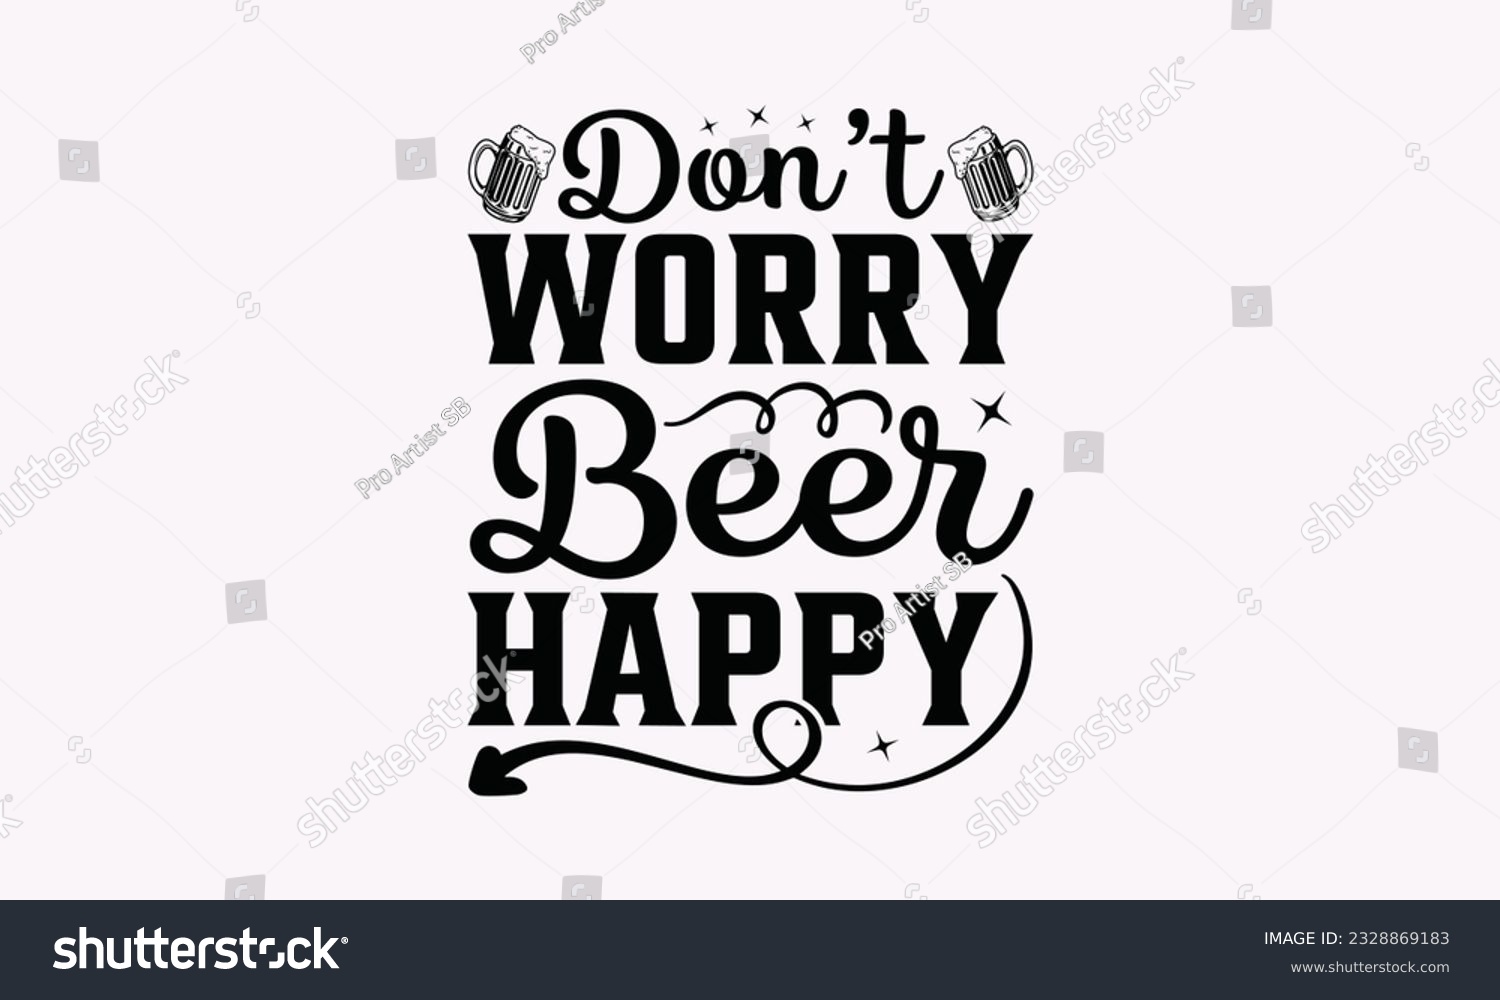 SVG of Don’t Worry Beer Happy - Alcohol SVG Design, Cheer Quotes, Hand drawn lettering phrase, Isolated on white background. svg